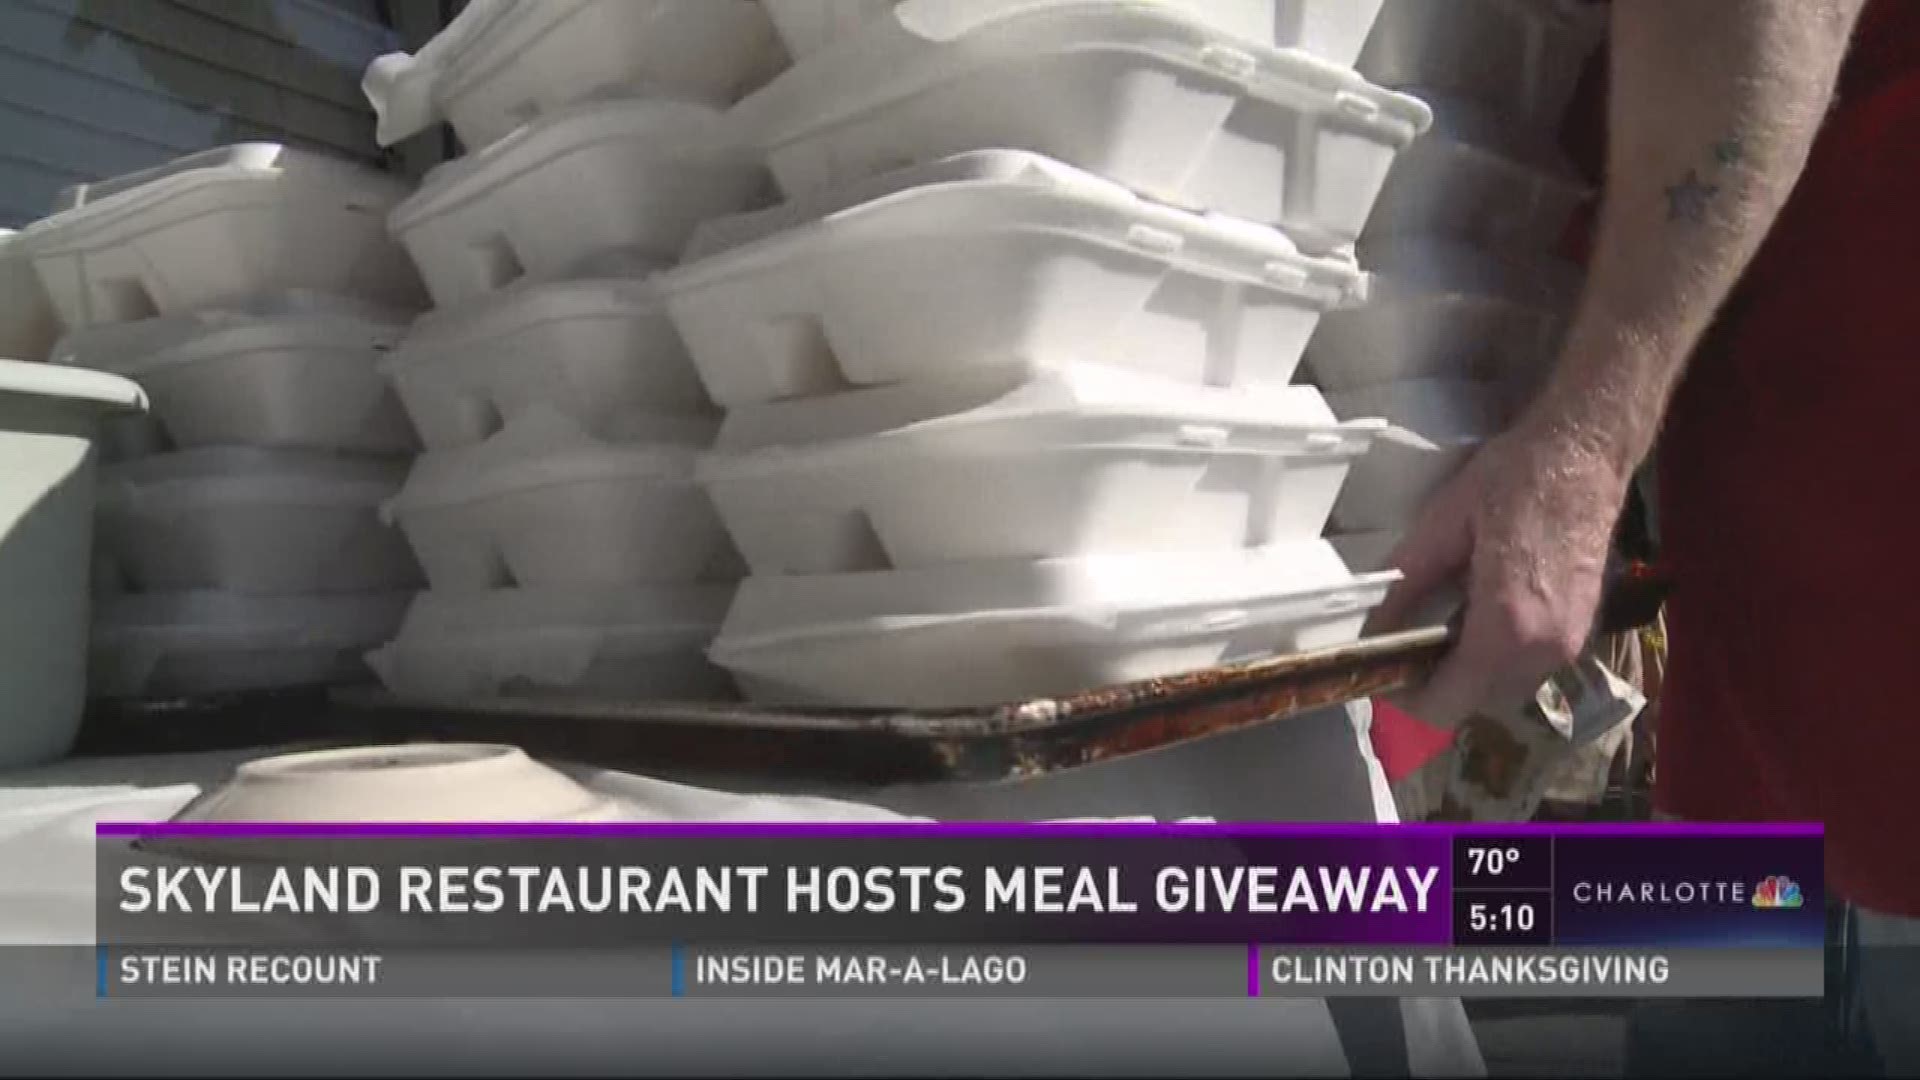 It's almost becoming a Charlotte tradition. A Charlotte restaurant gives away food on Thanksgiving for those in need.